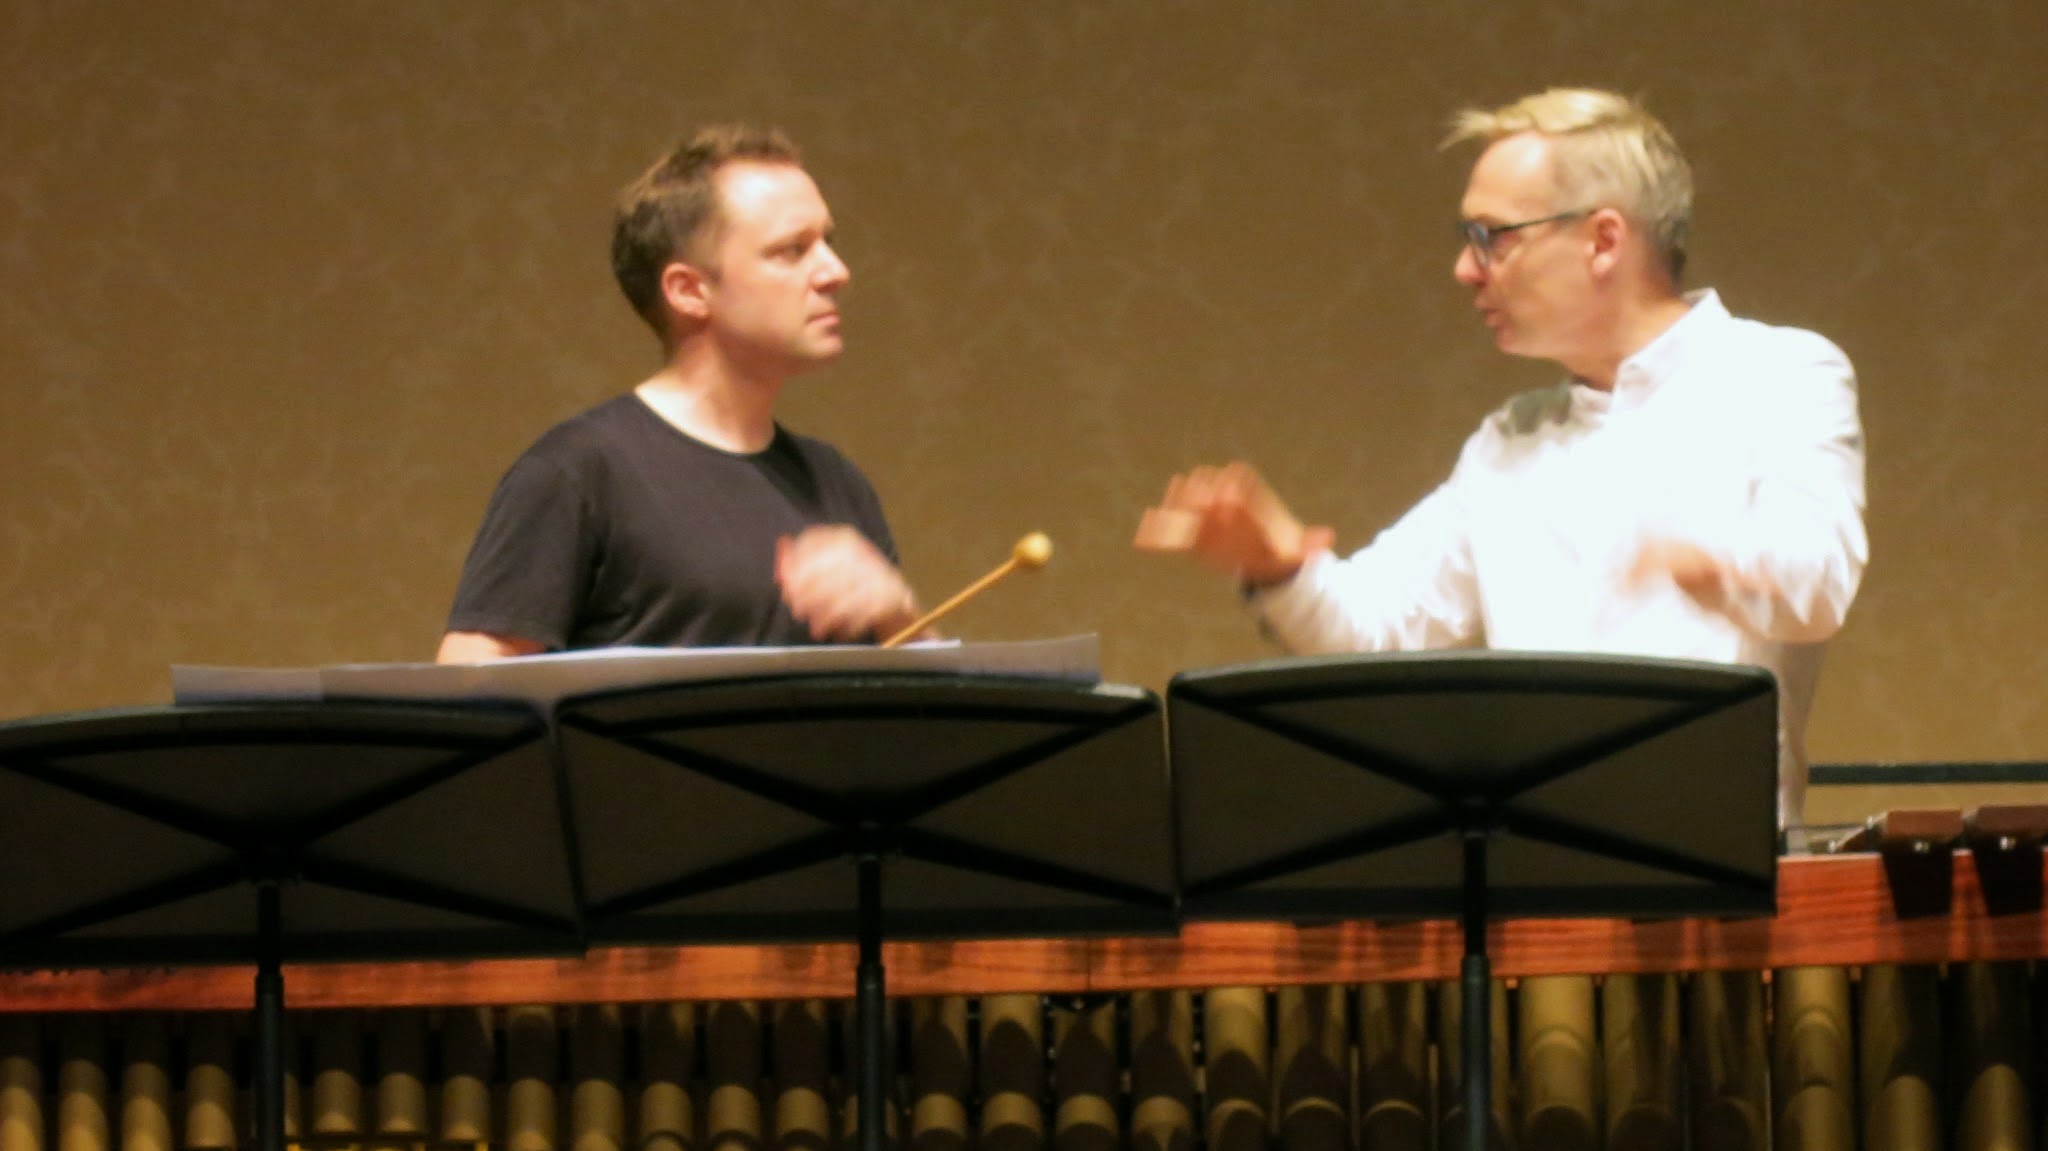 With Rolf Wallin discussing his new suite of marimba pieces inspired by Gabriel Garcia Marquez short stories.